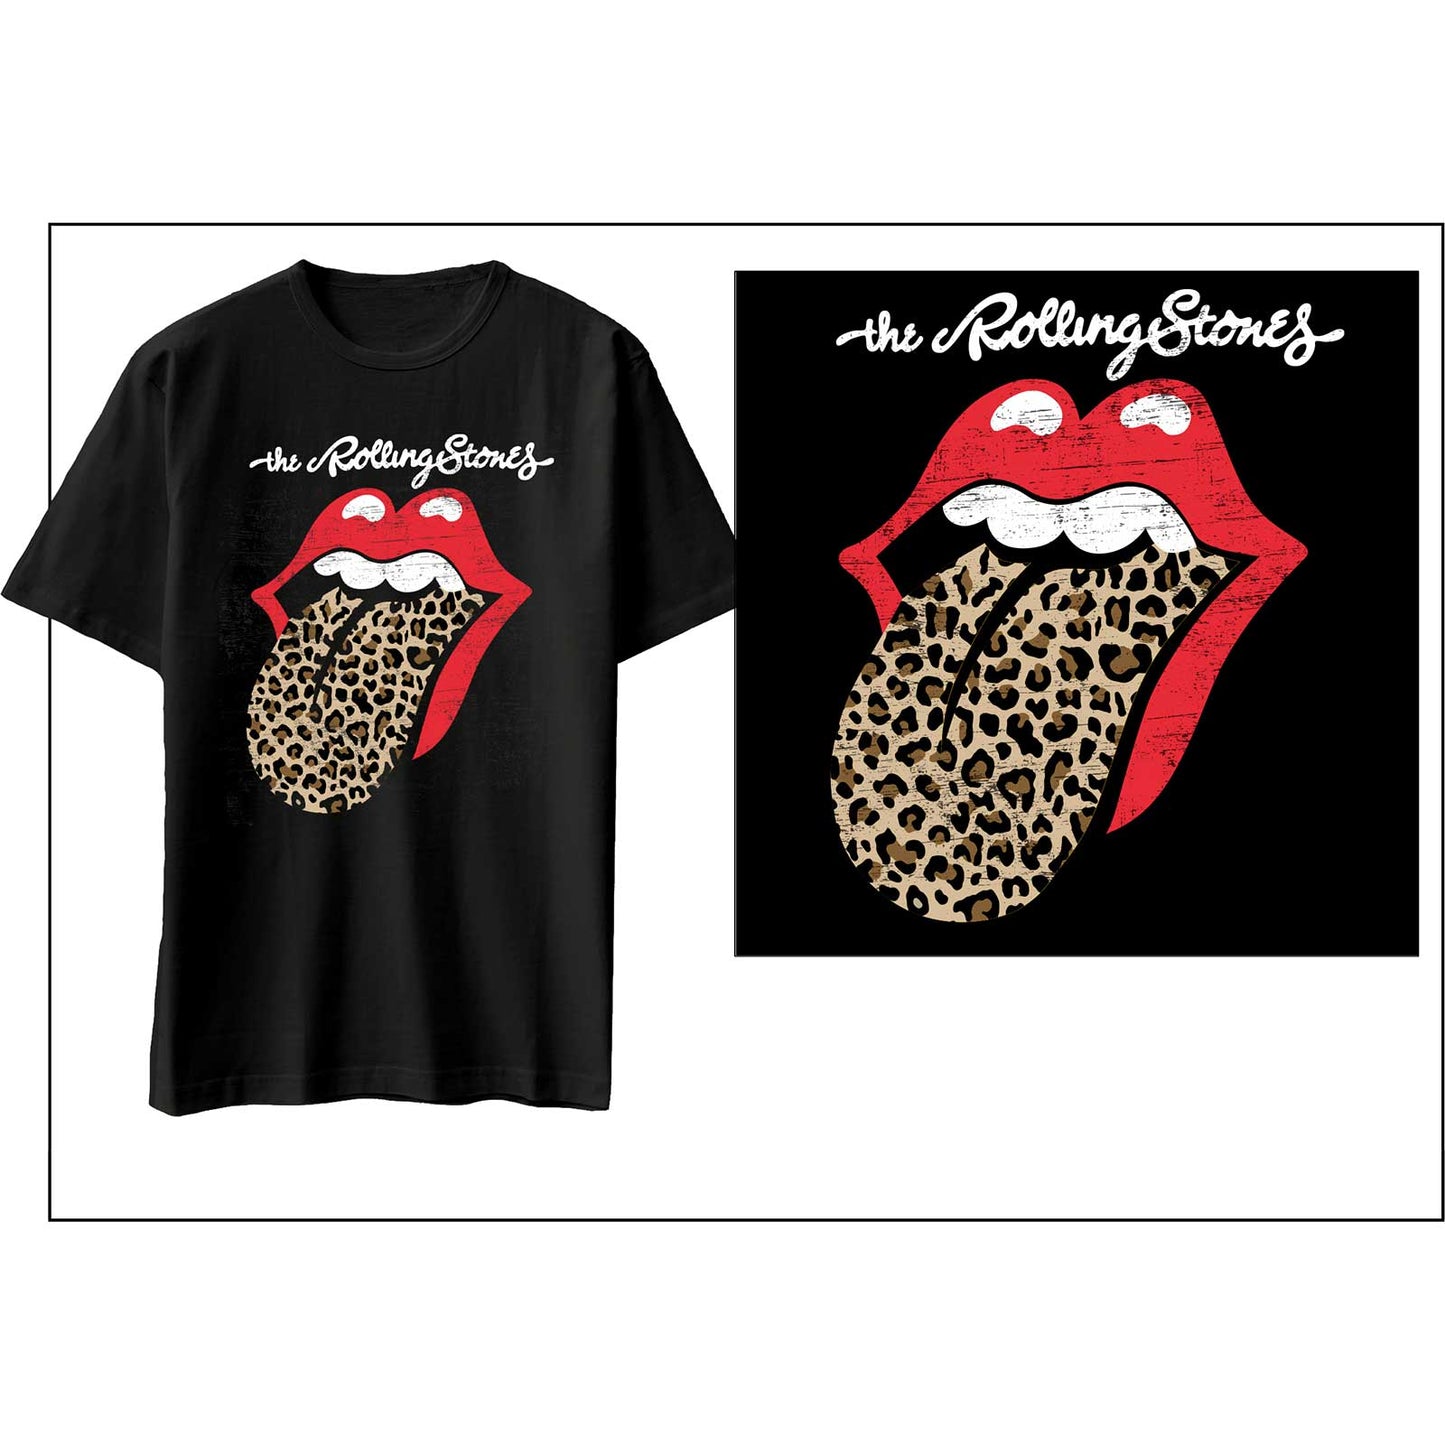 THE ROLLING STONES BAND SHIRT LEOPARD TONGUE